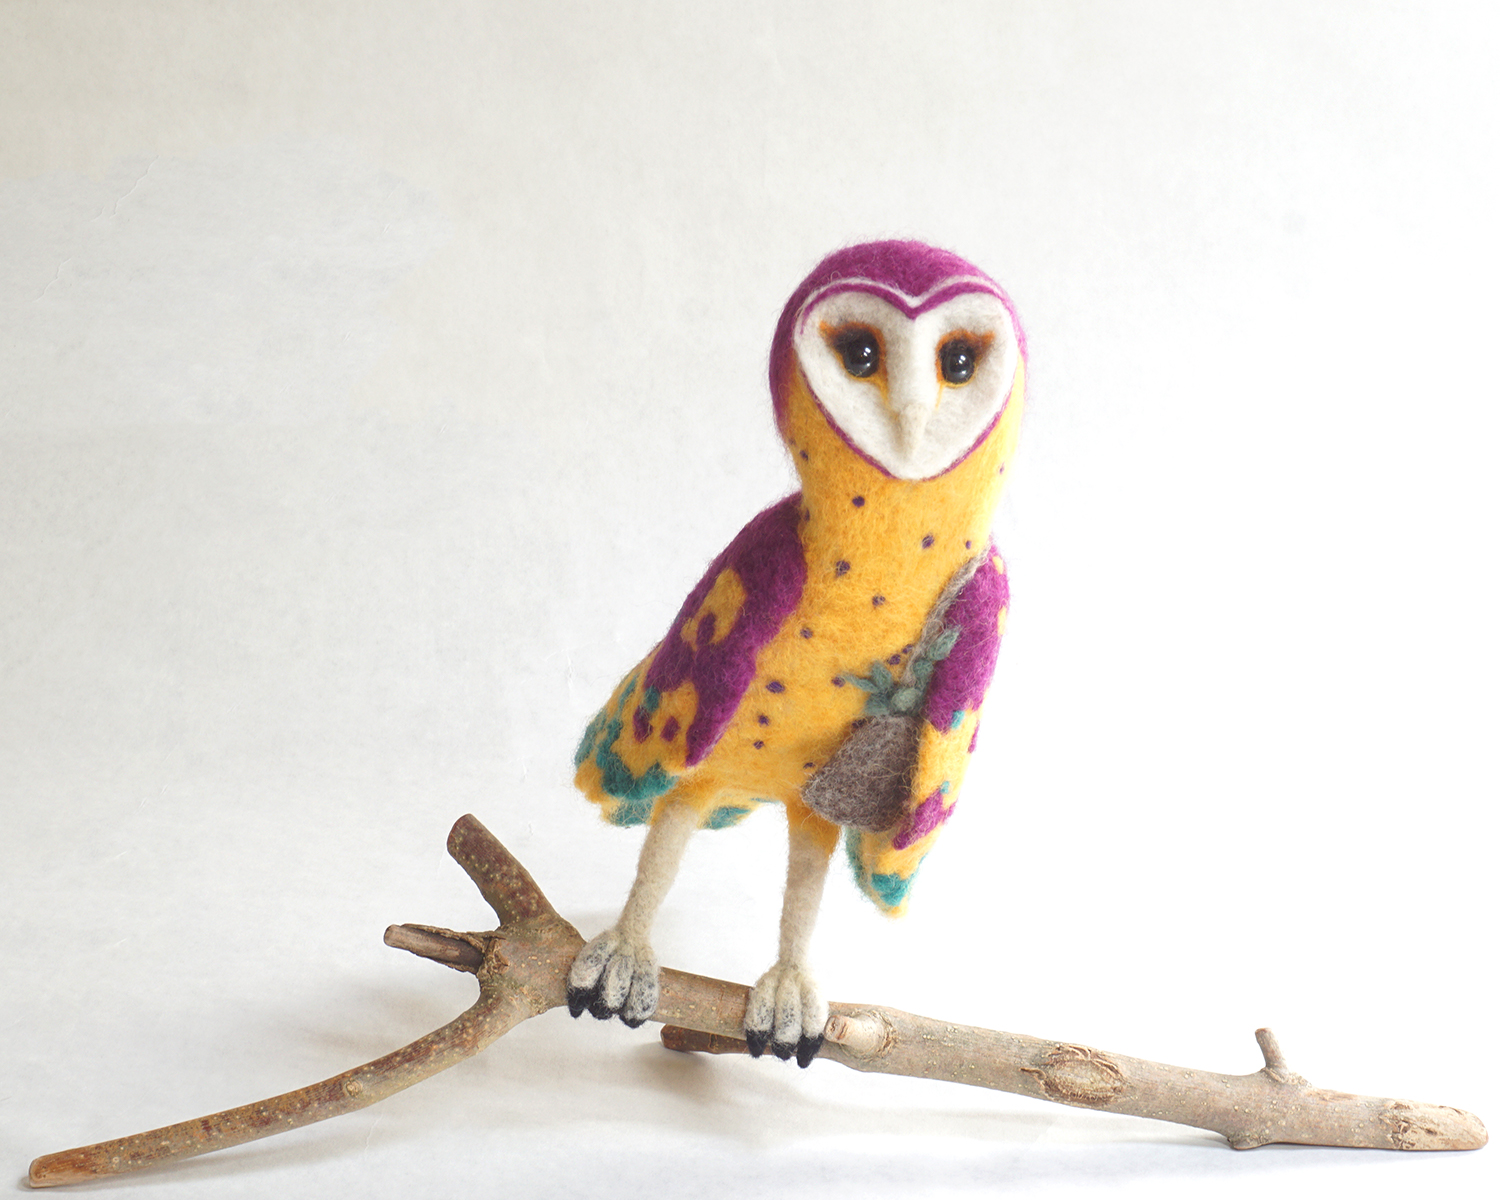 Wise and Magical anthropomorphic wise-woman owl sculpture